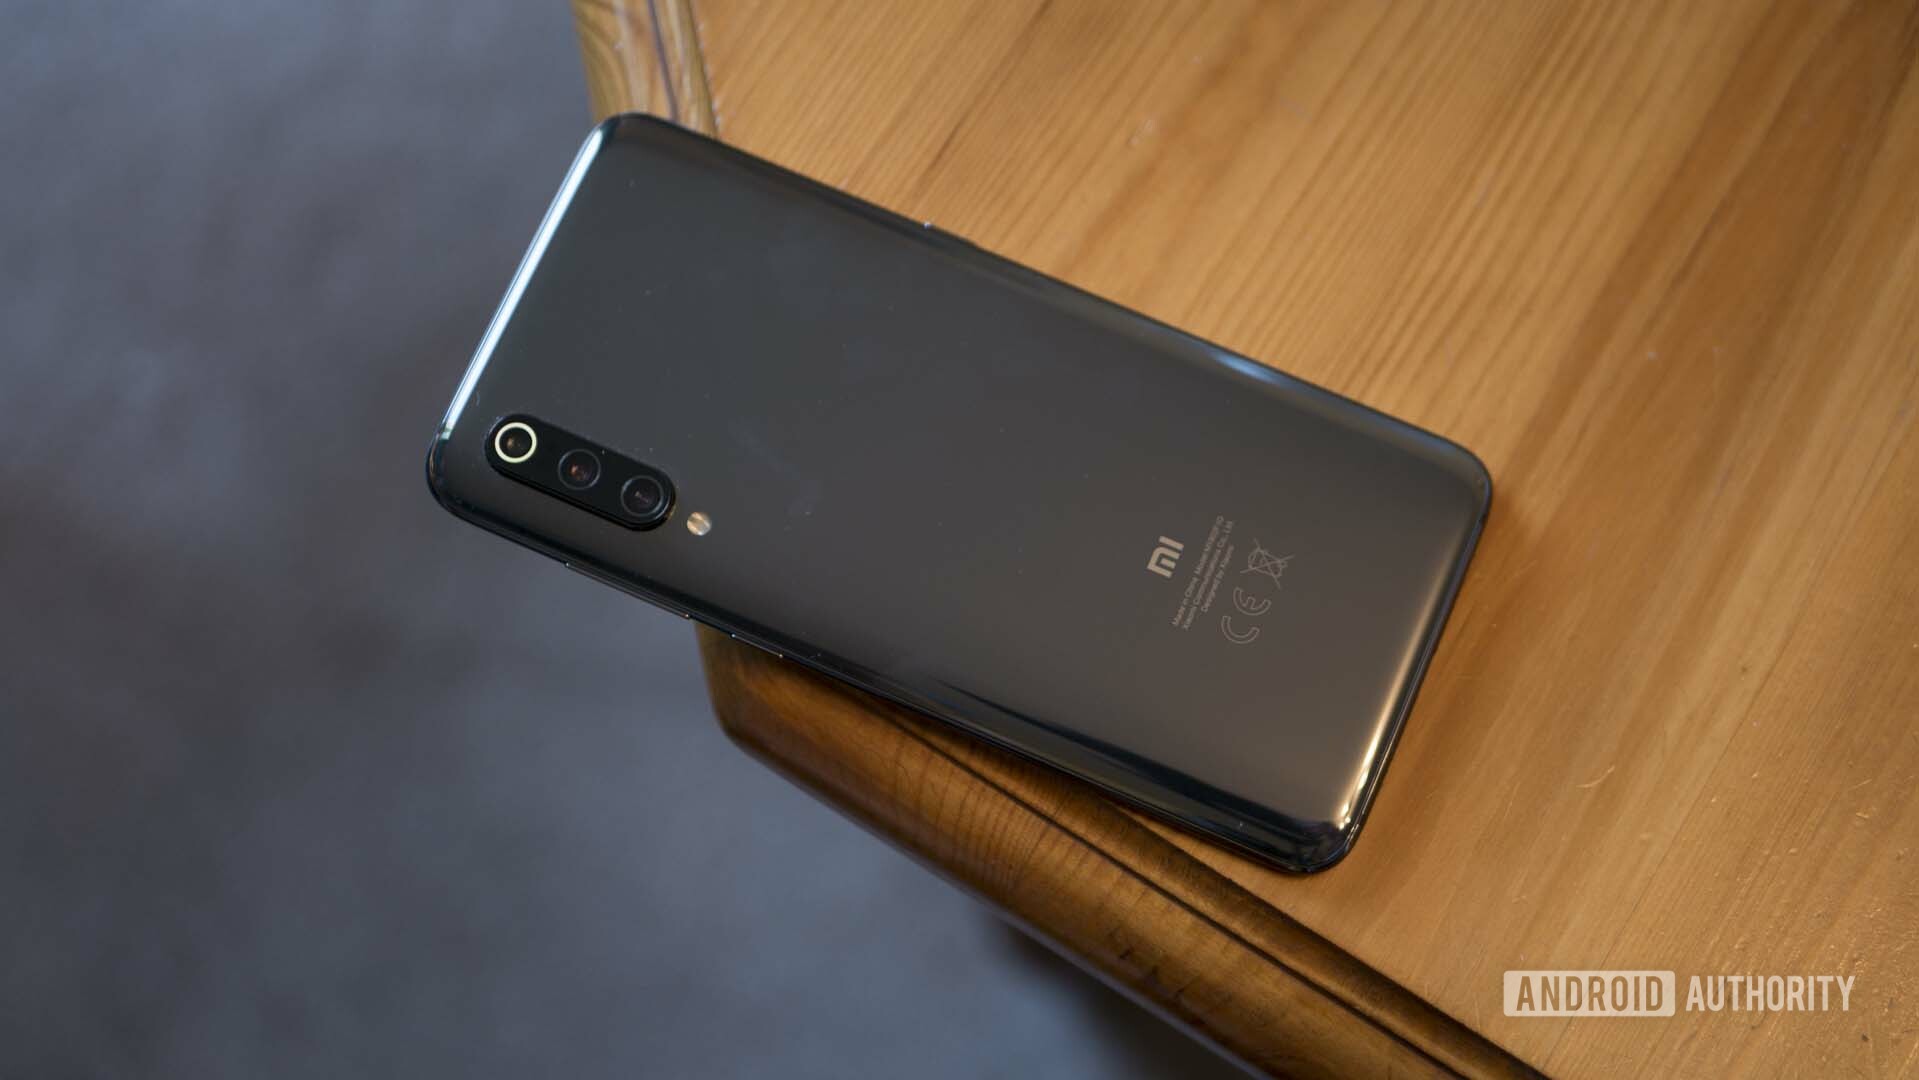 The Xiaomi Mi 9 packs wireless charging, but future flagships could offer reverse wireless charging.